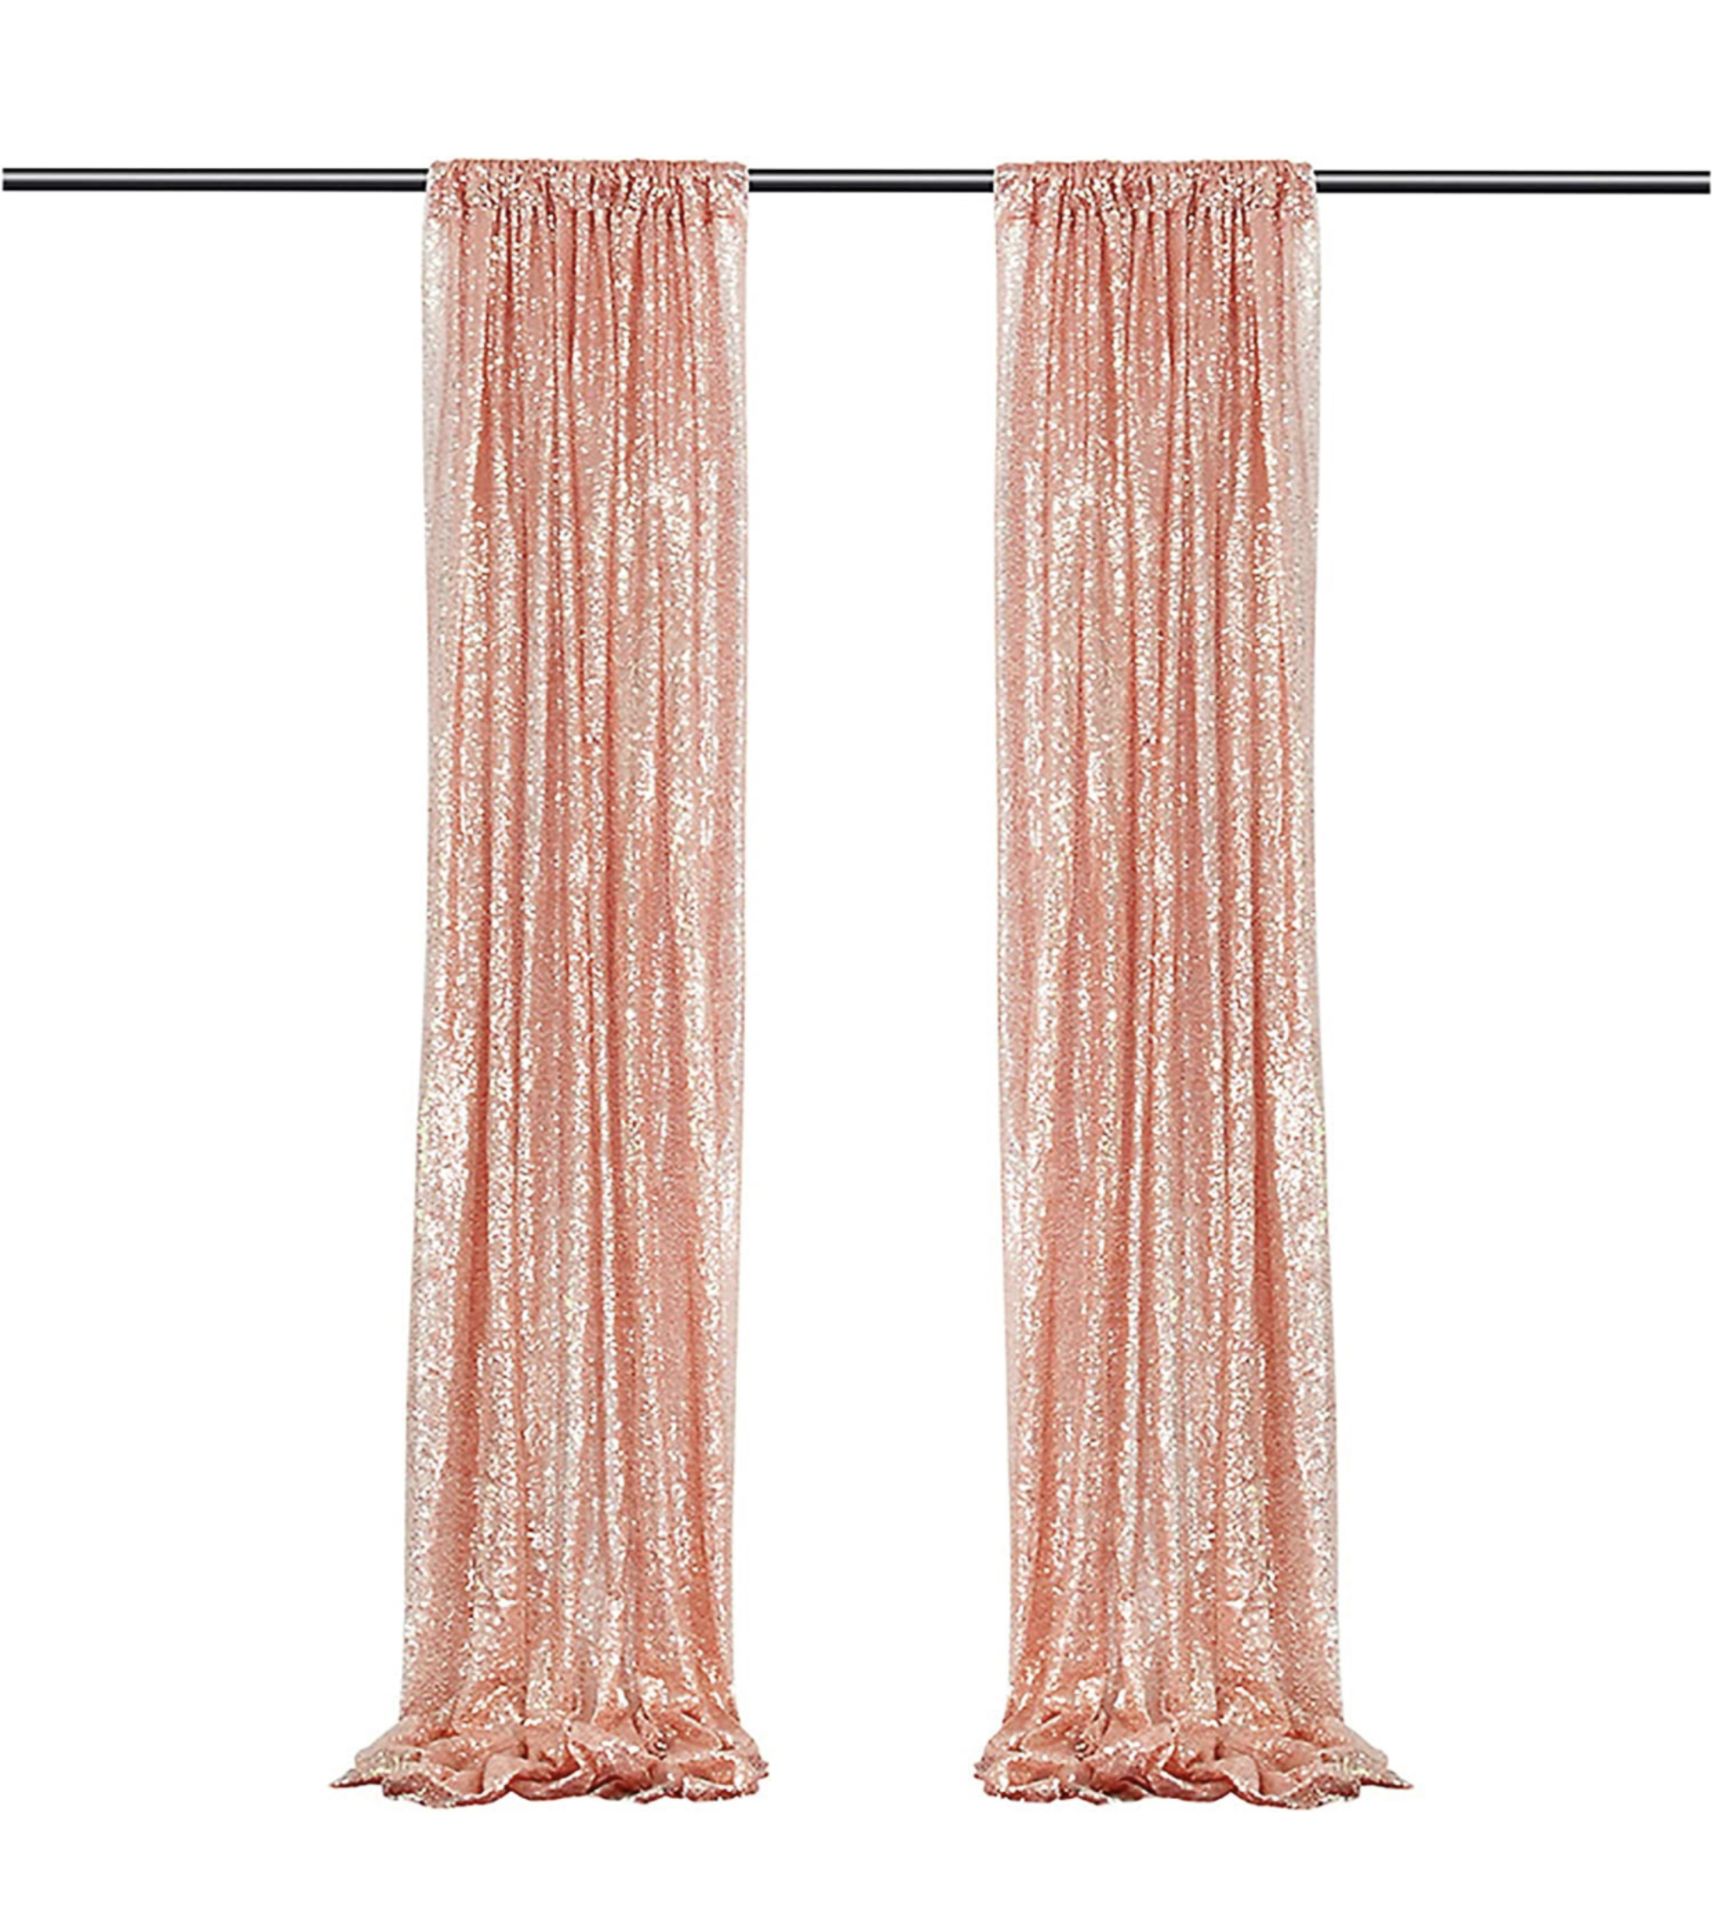 Rnsunh Sequin Backdrop Curtain 2 Panel 2x8ft Glitter Backdrop Curtains Party Drapes